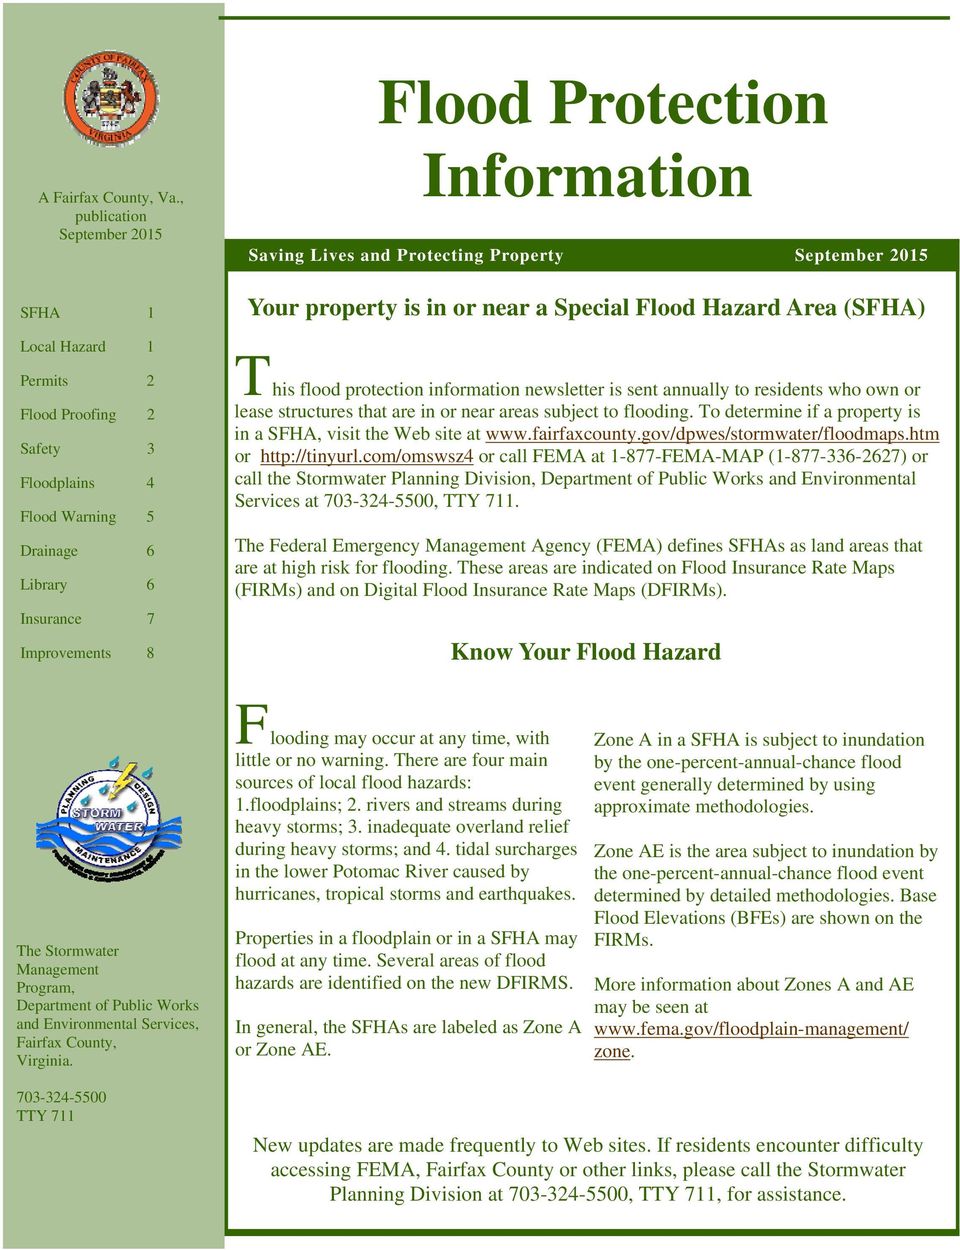 Permits 2 Flood Proofing 2 Safety 3 Floodplains 4 Flood Warning 5 Drainage 6 Library 6 Insurance 7 Improvements 8 This flood protection information newsletter is sent annually to residents who own or